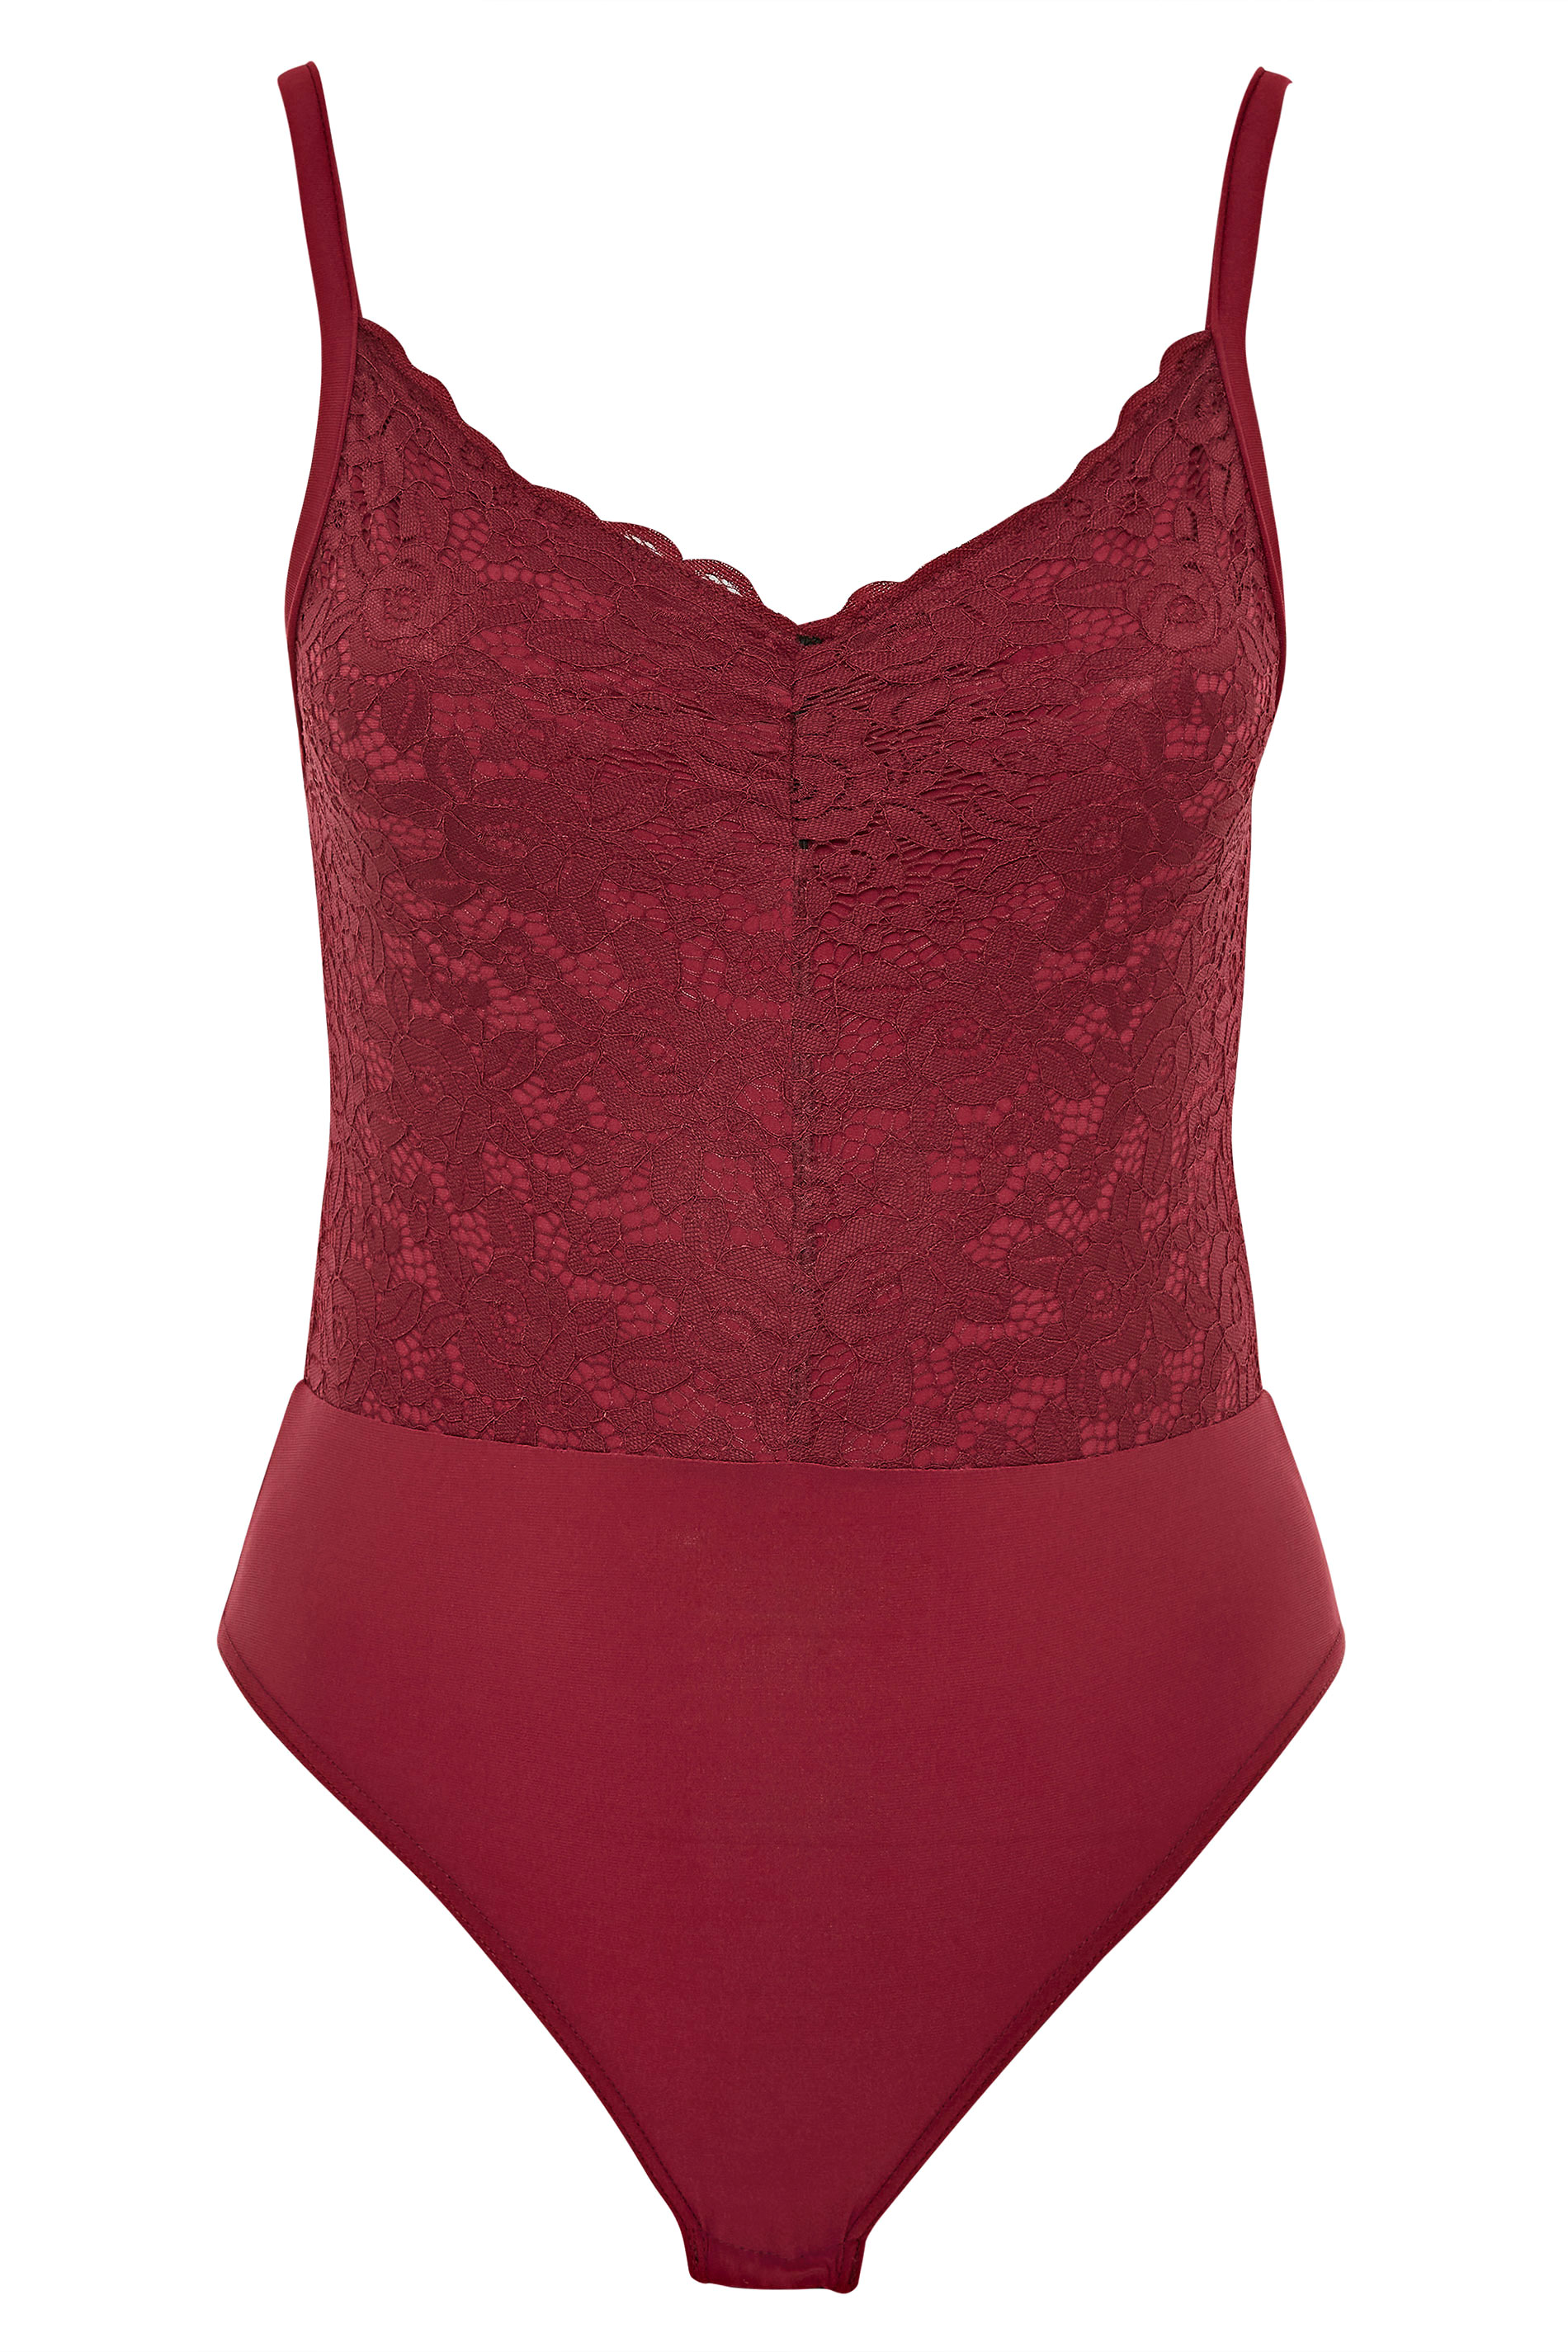 Plus Size LIMITED COLLECTION Red Lace Bodysuit | Yours Clothing